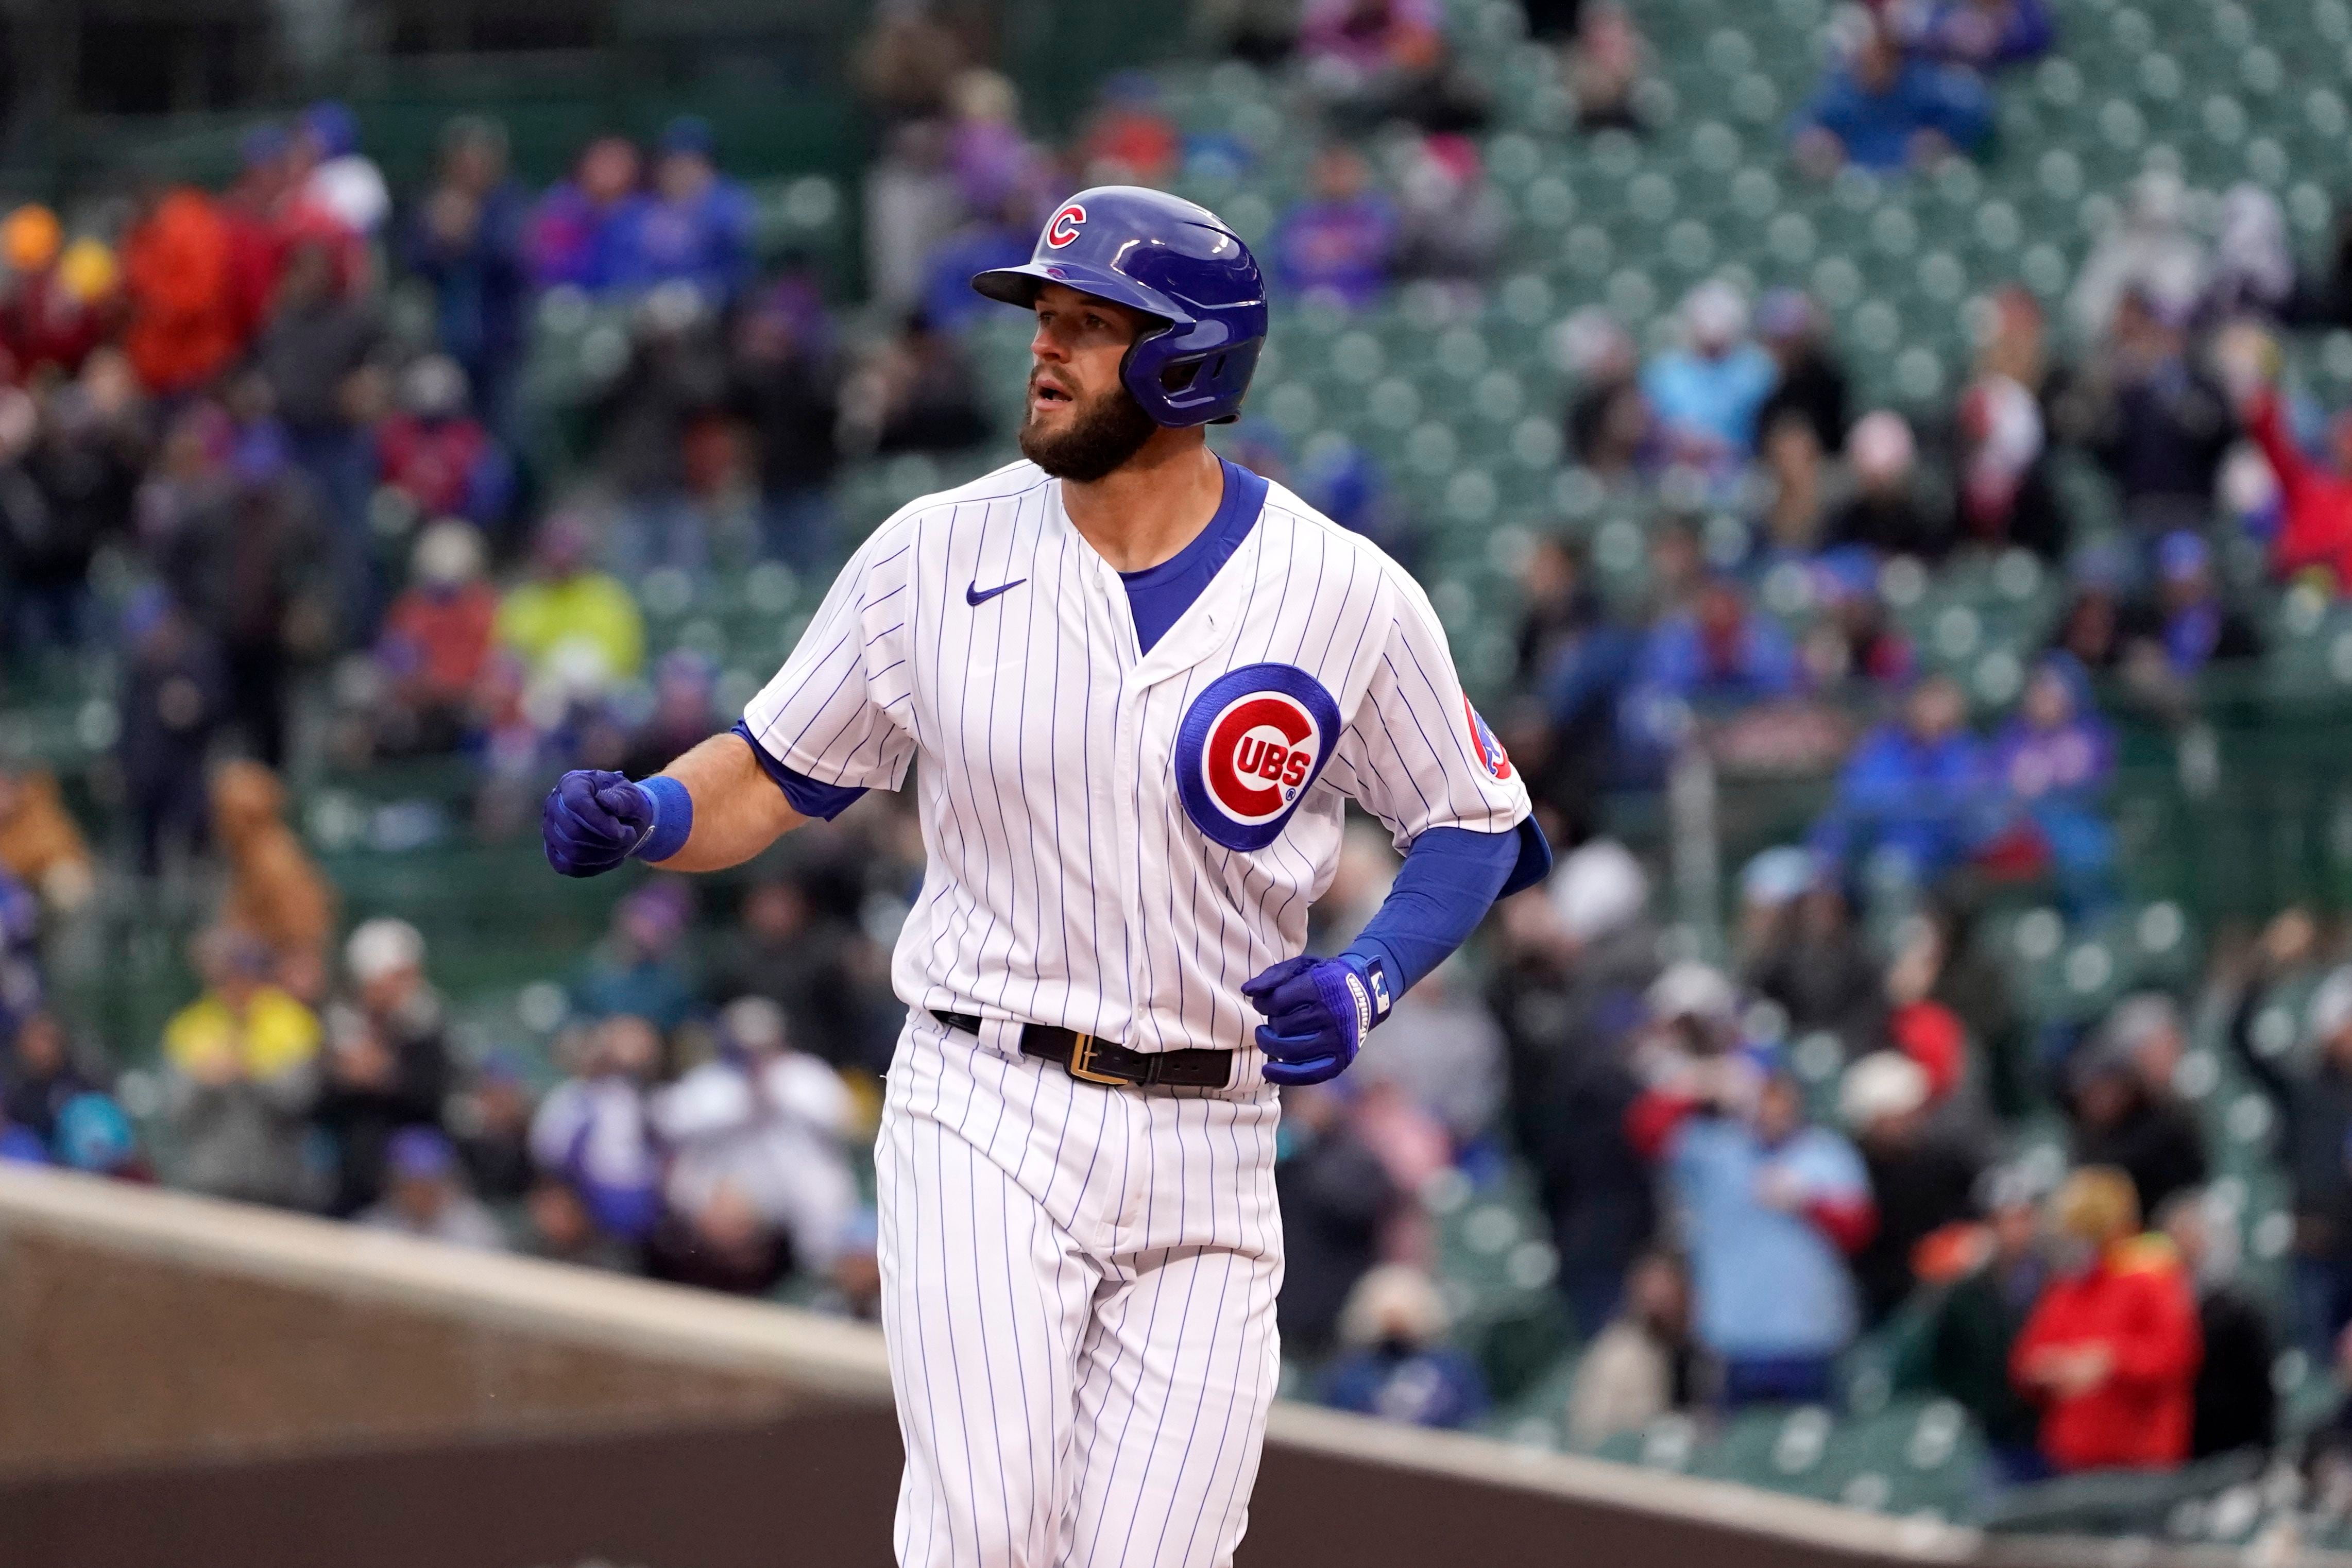 Recalled to the Major Leagues, Can Chicago Cubs' David Bote Return